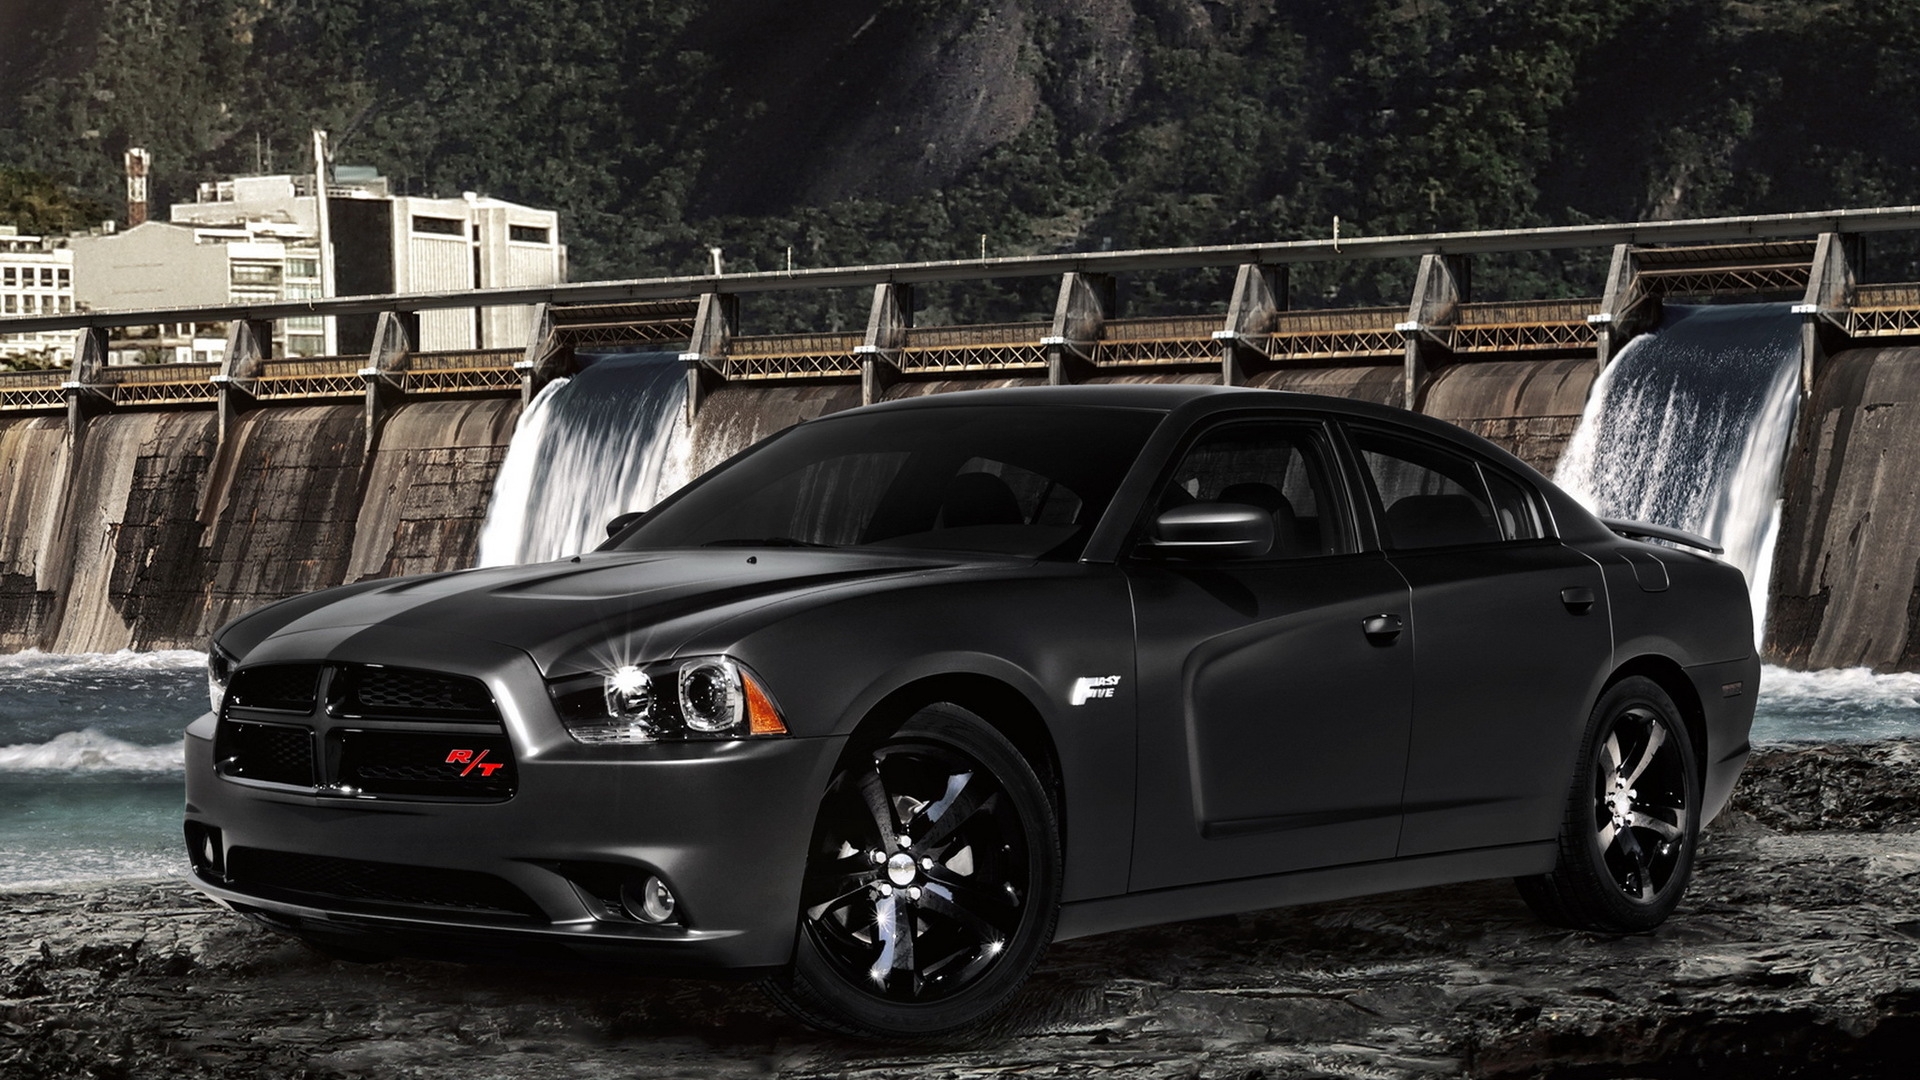 Dodge charger wallpaper